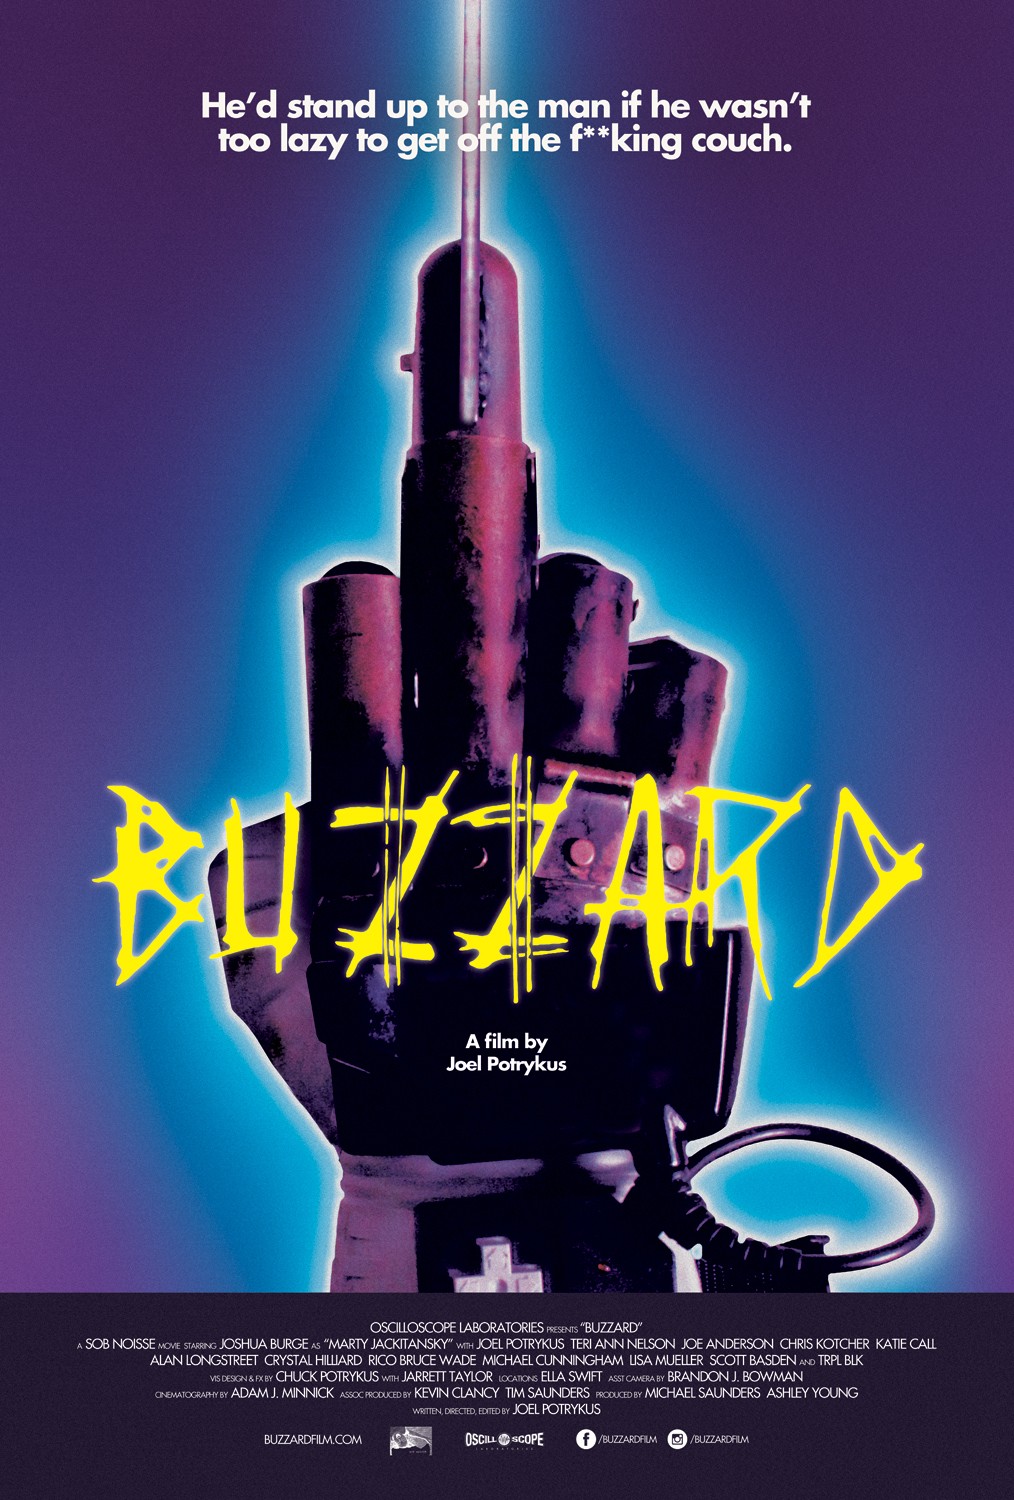 Extra Large Movie Poster Image for Buzzard 